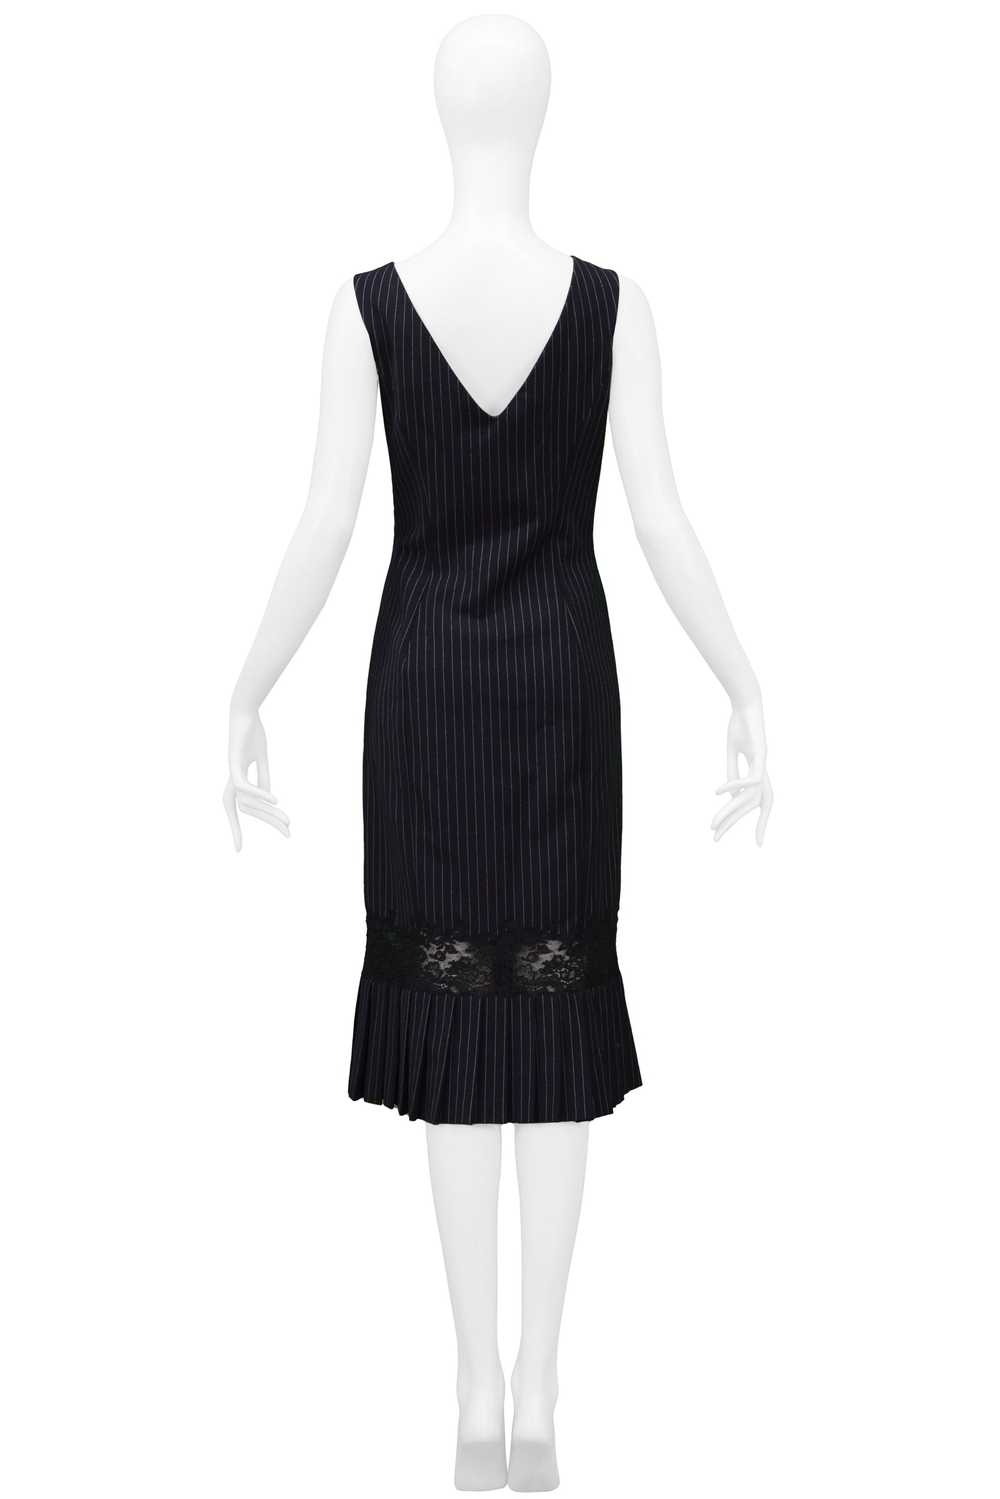 JOHN GALLIANO NAVY PINSTRIPE DRESS WITH LACE INSET - image 2